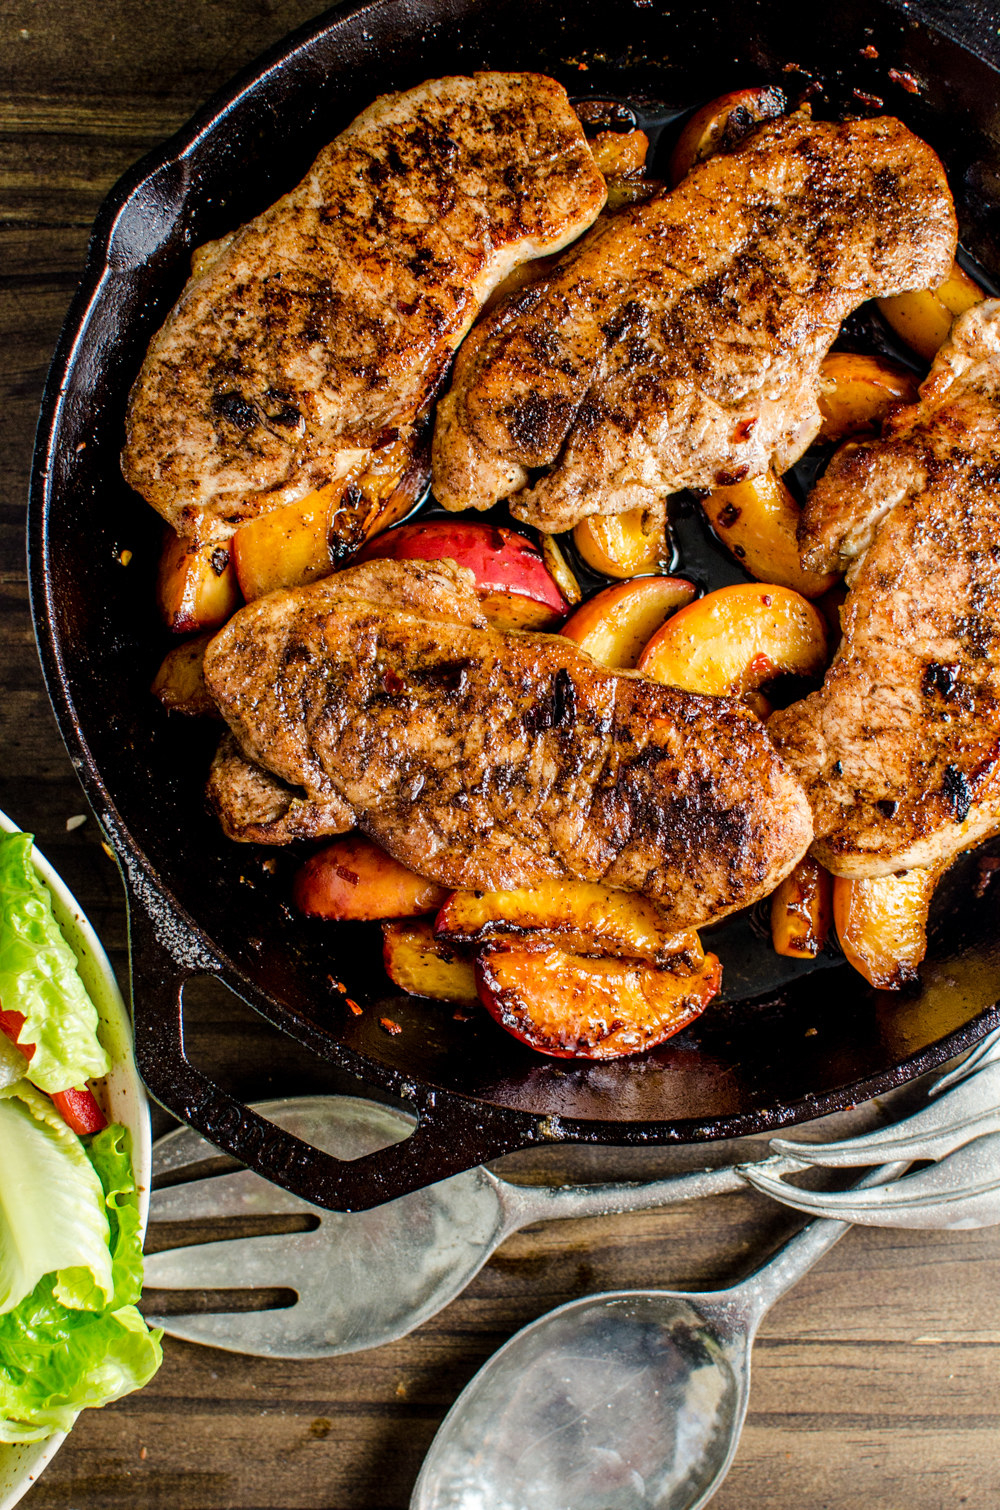 25 Delicious Things You Can Make In A Cast Iron Skillet